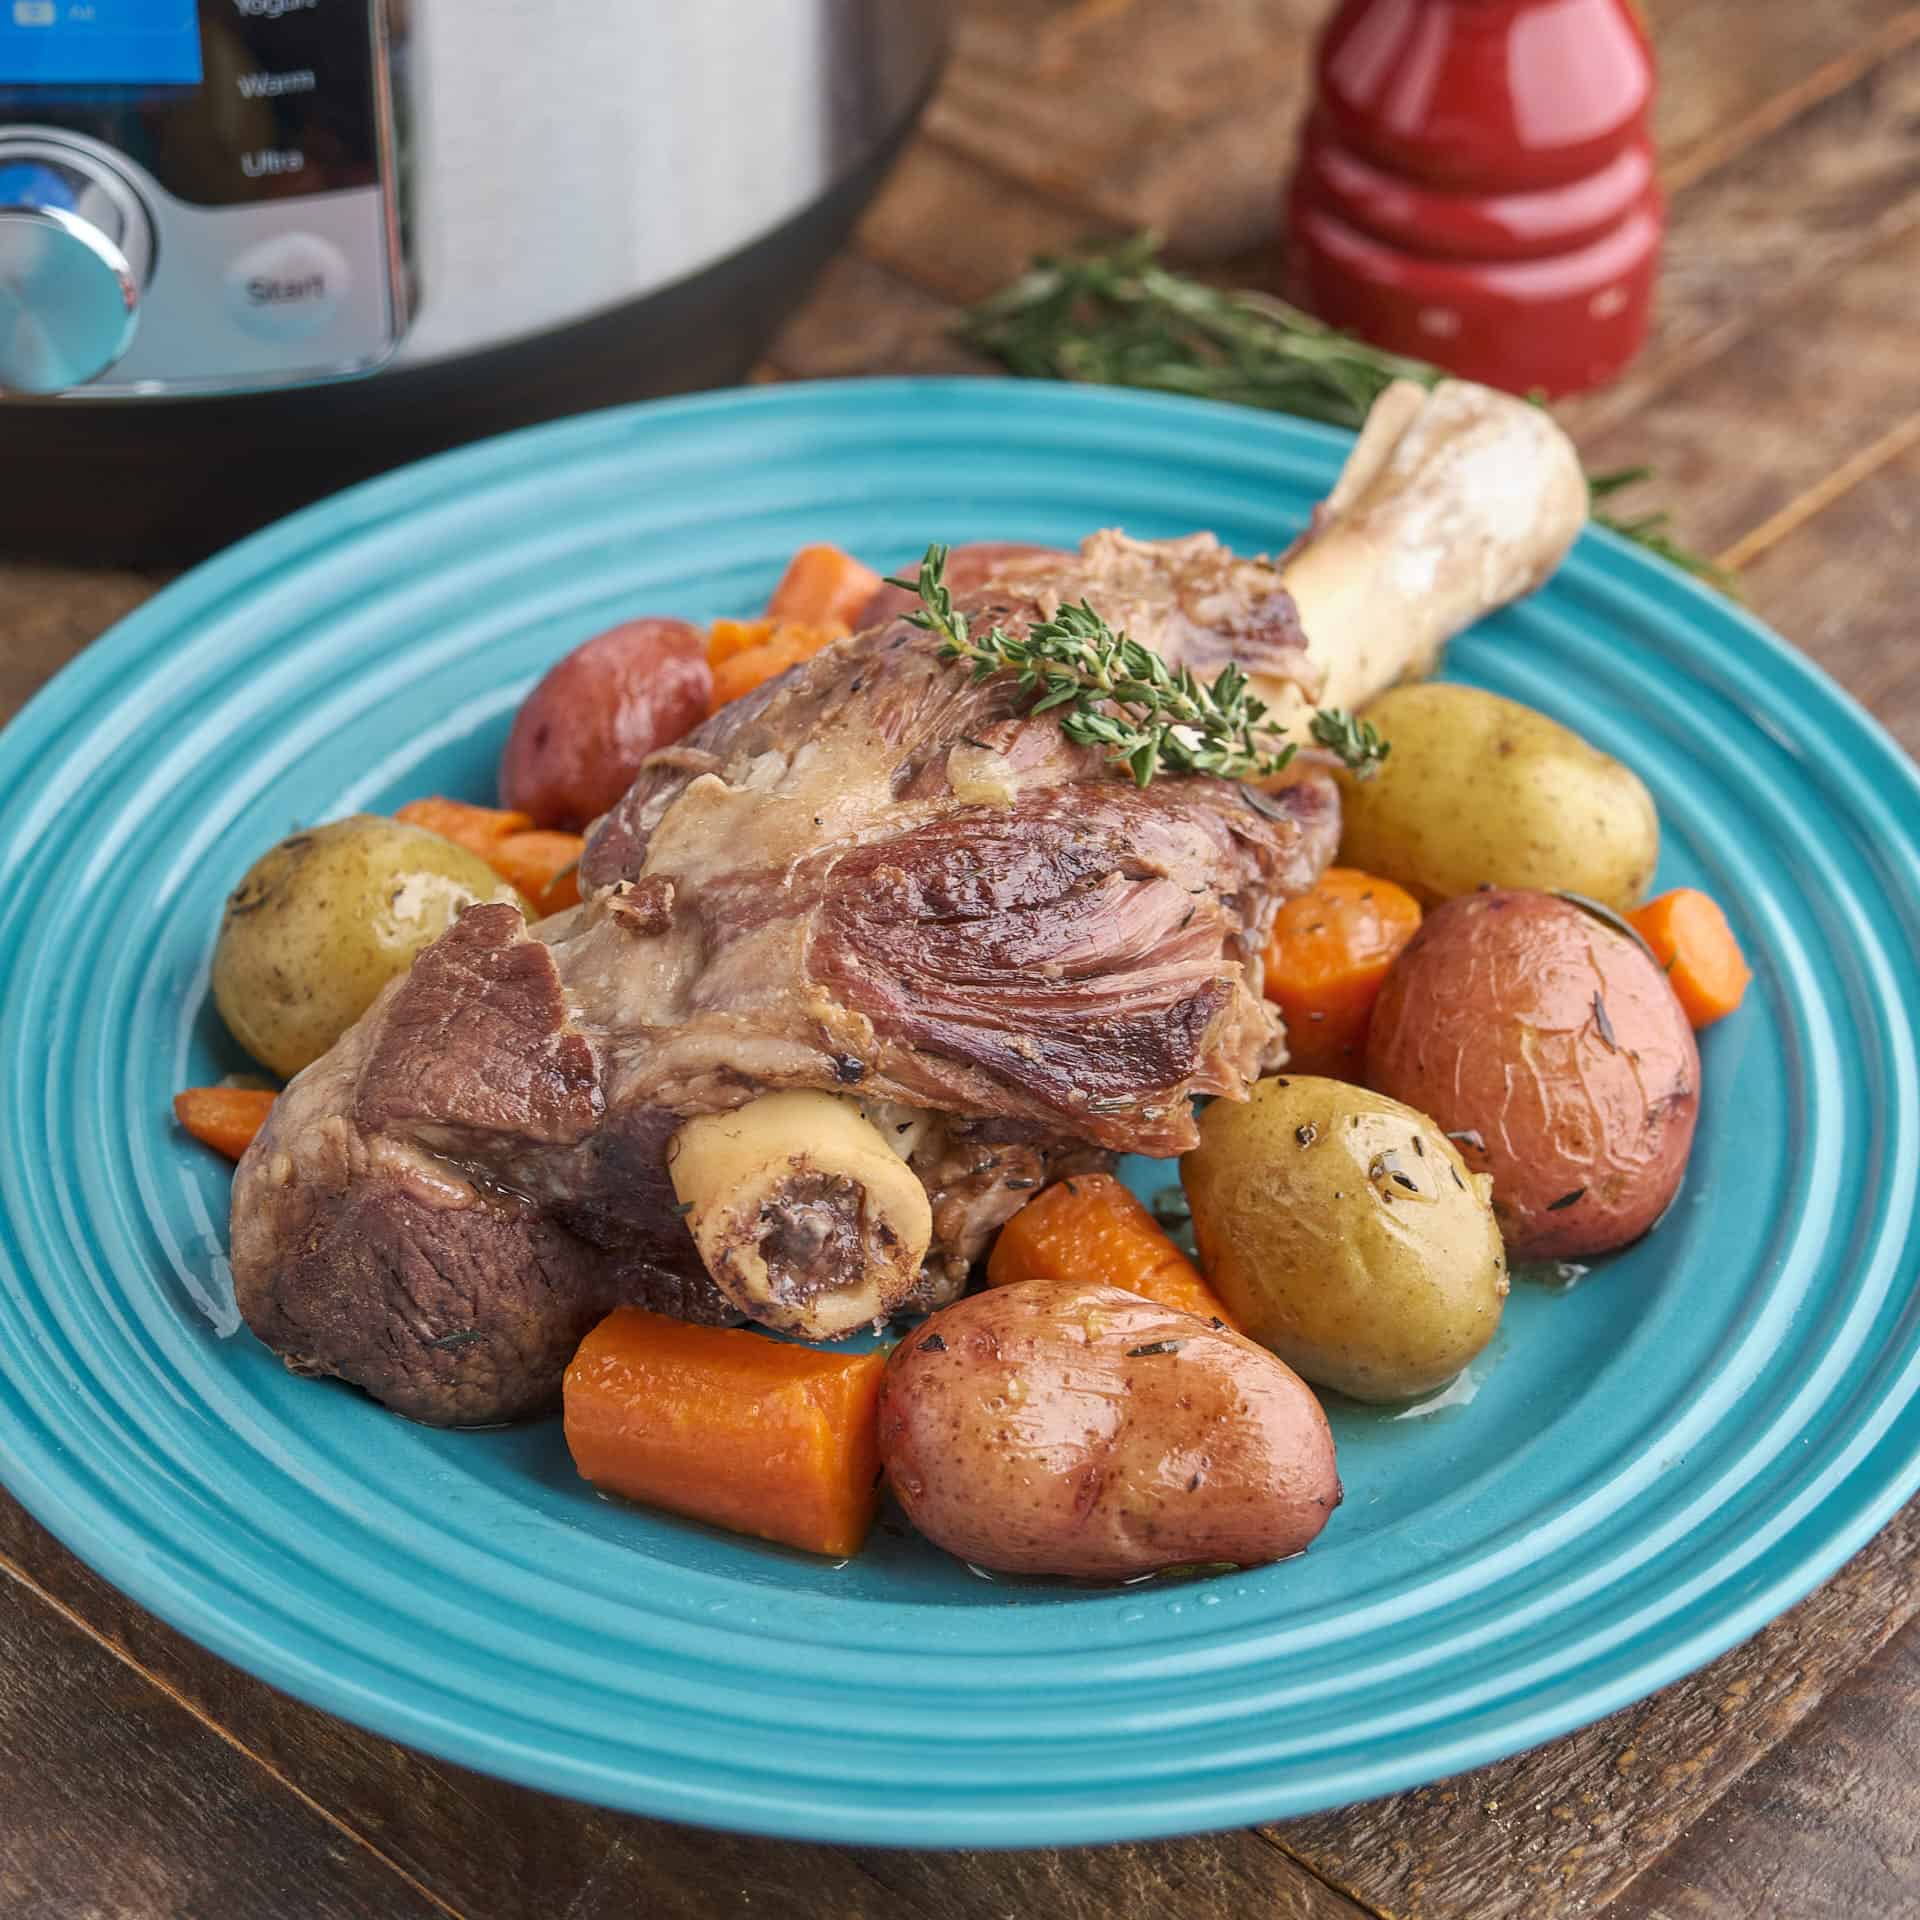 A braised lamb shank, surrounded by potatoes and carrots, on a teal plate, with an Instant Pot, a bundle of thyme, and a pepper mill in the background